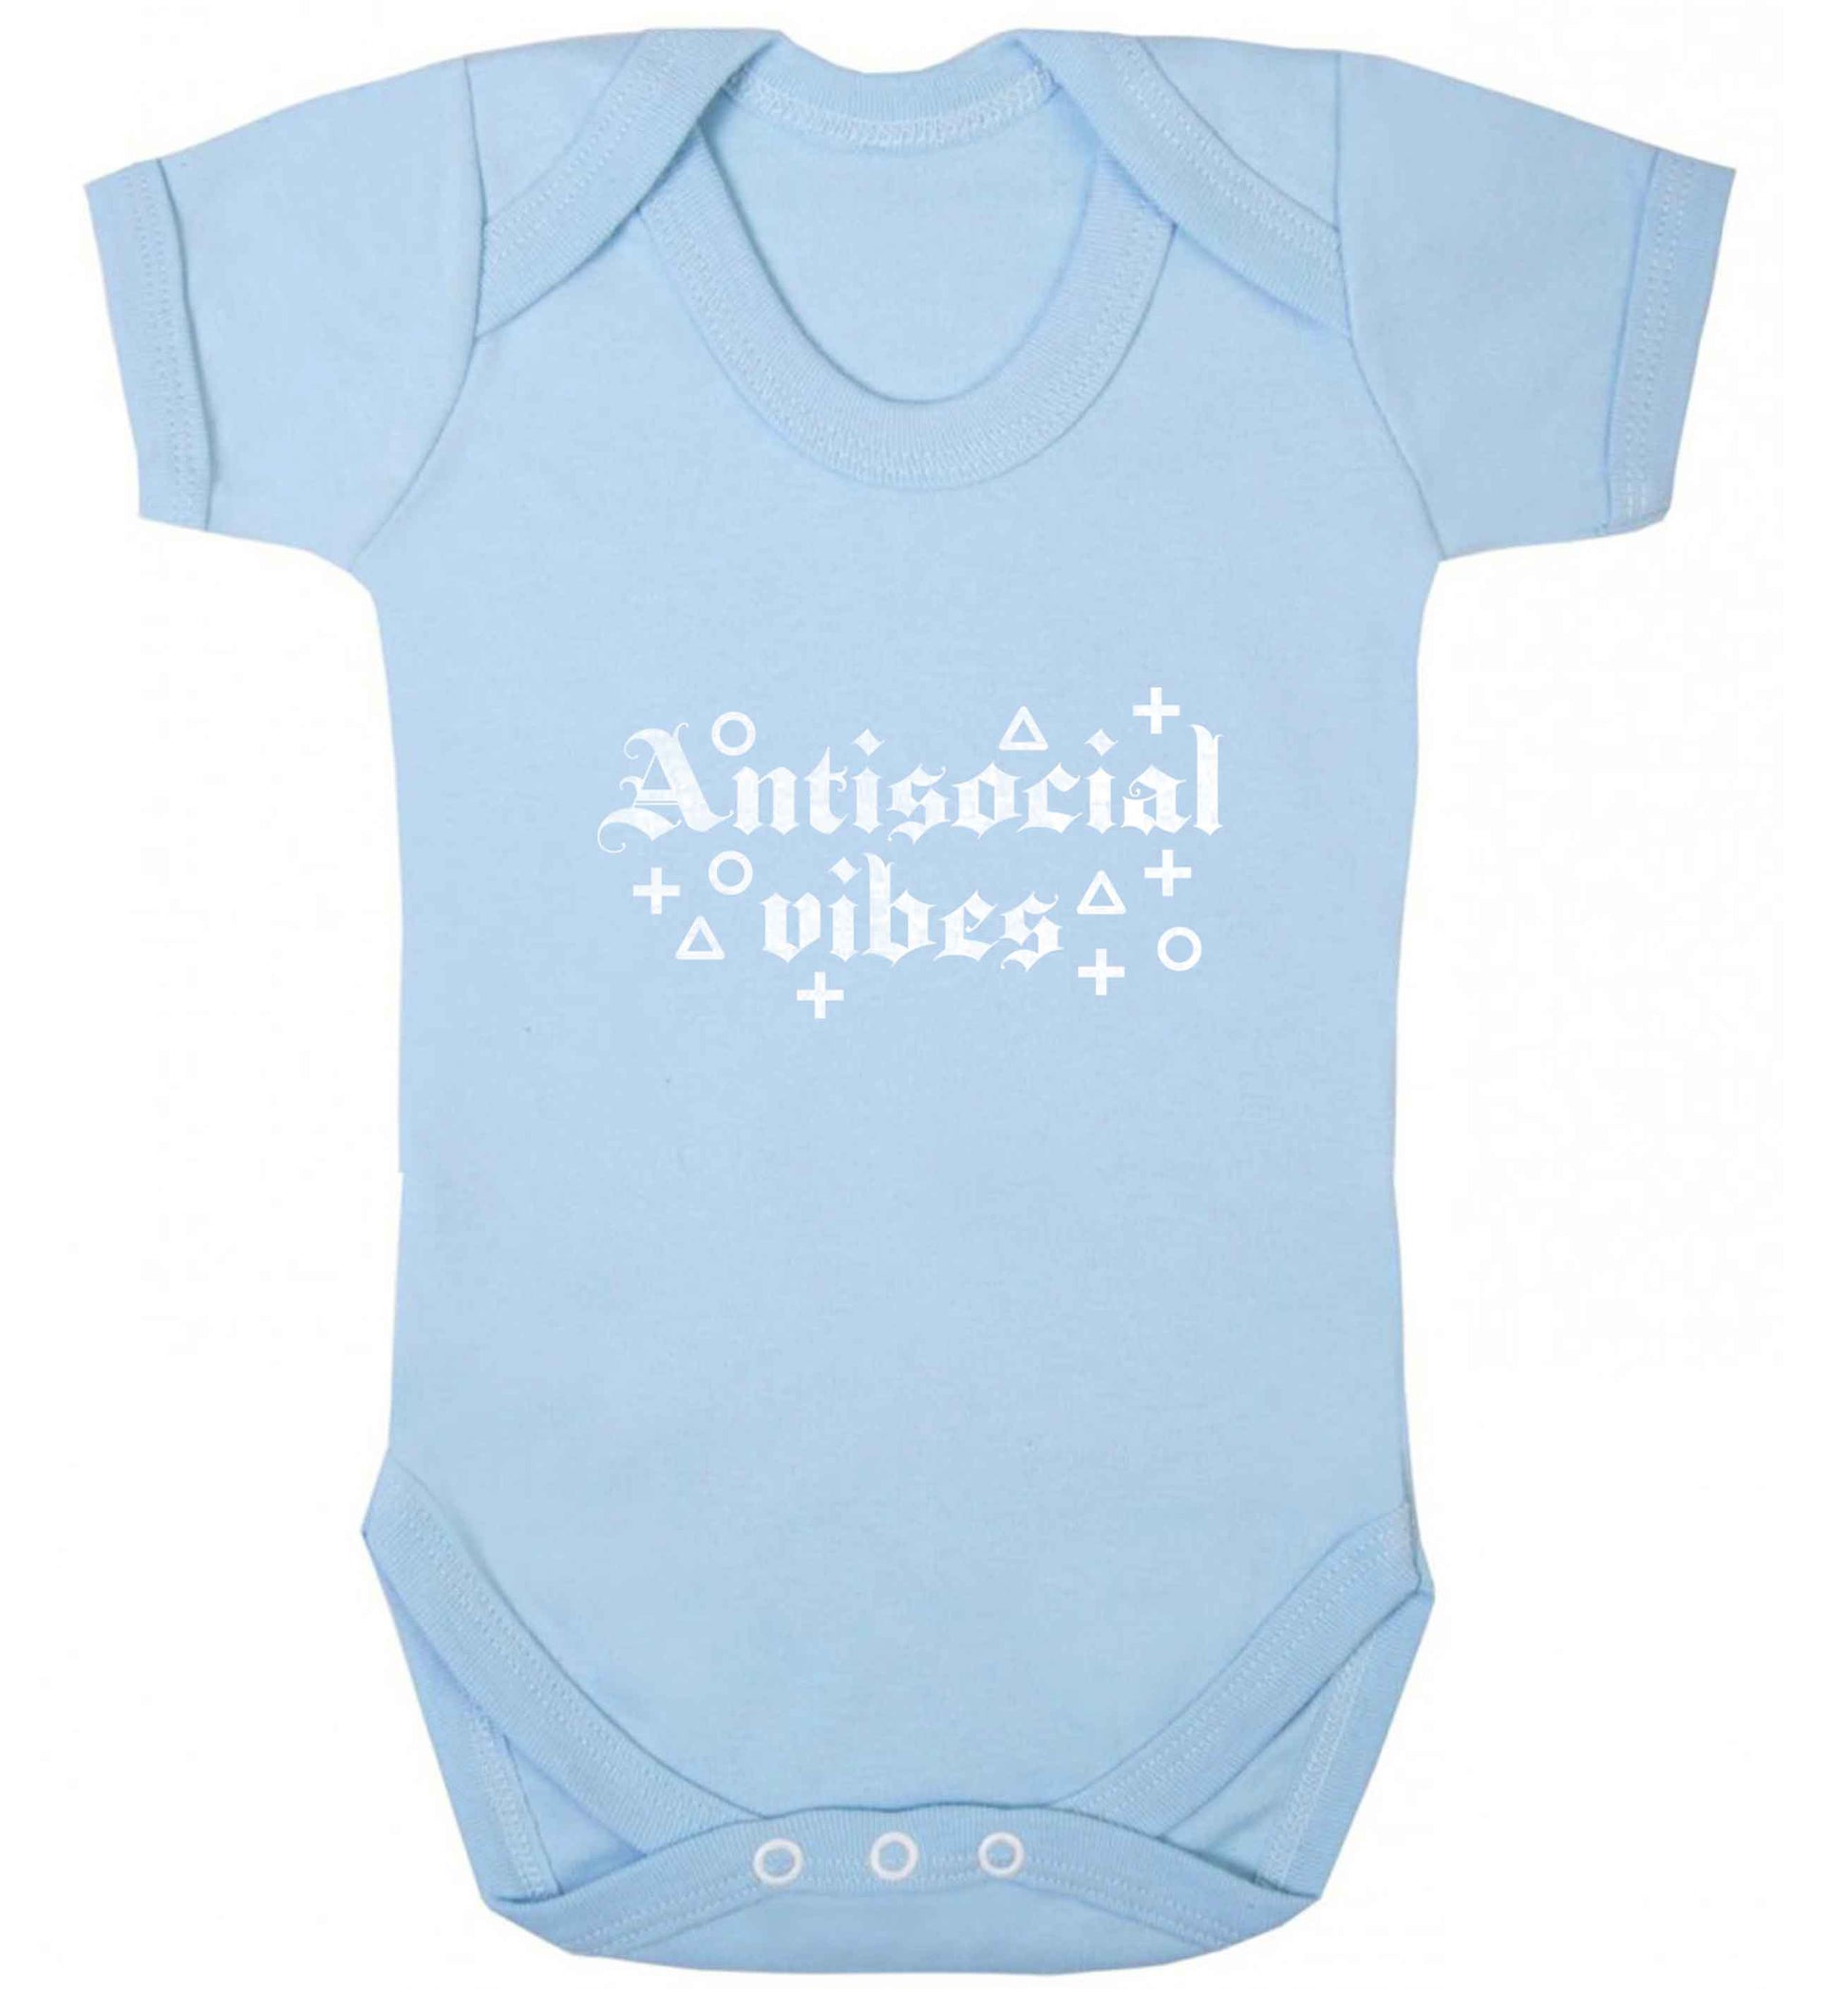 Antisocial vibes baby vest pale blue 18-24 months